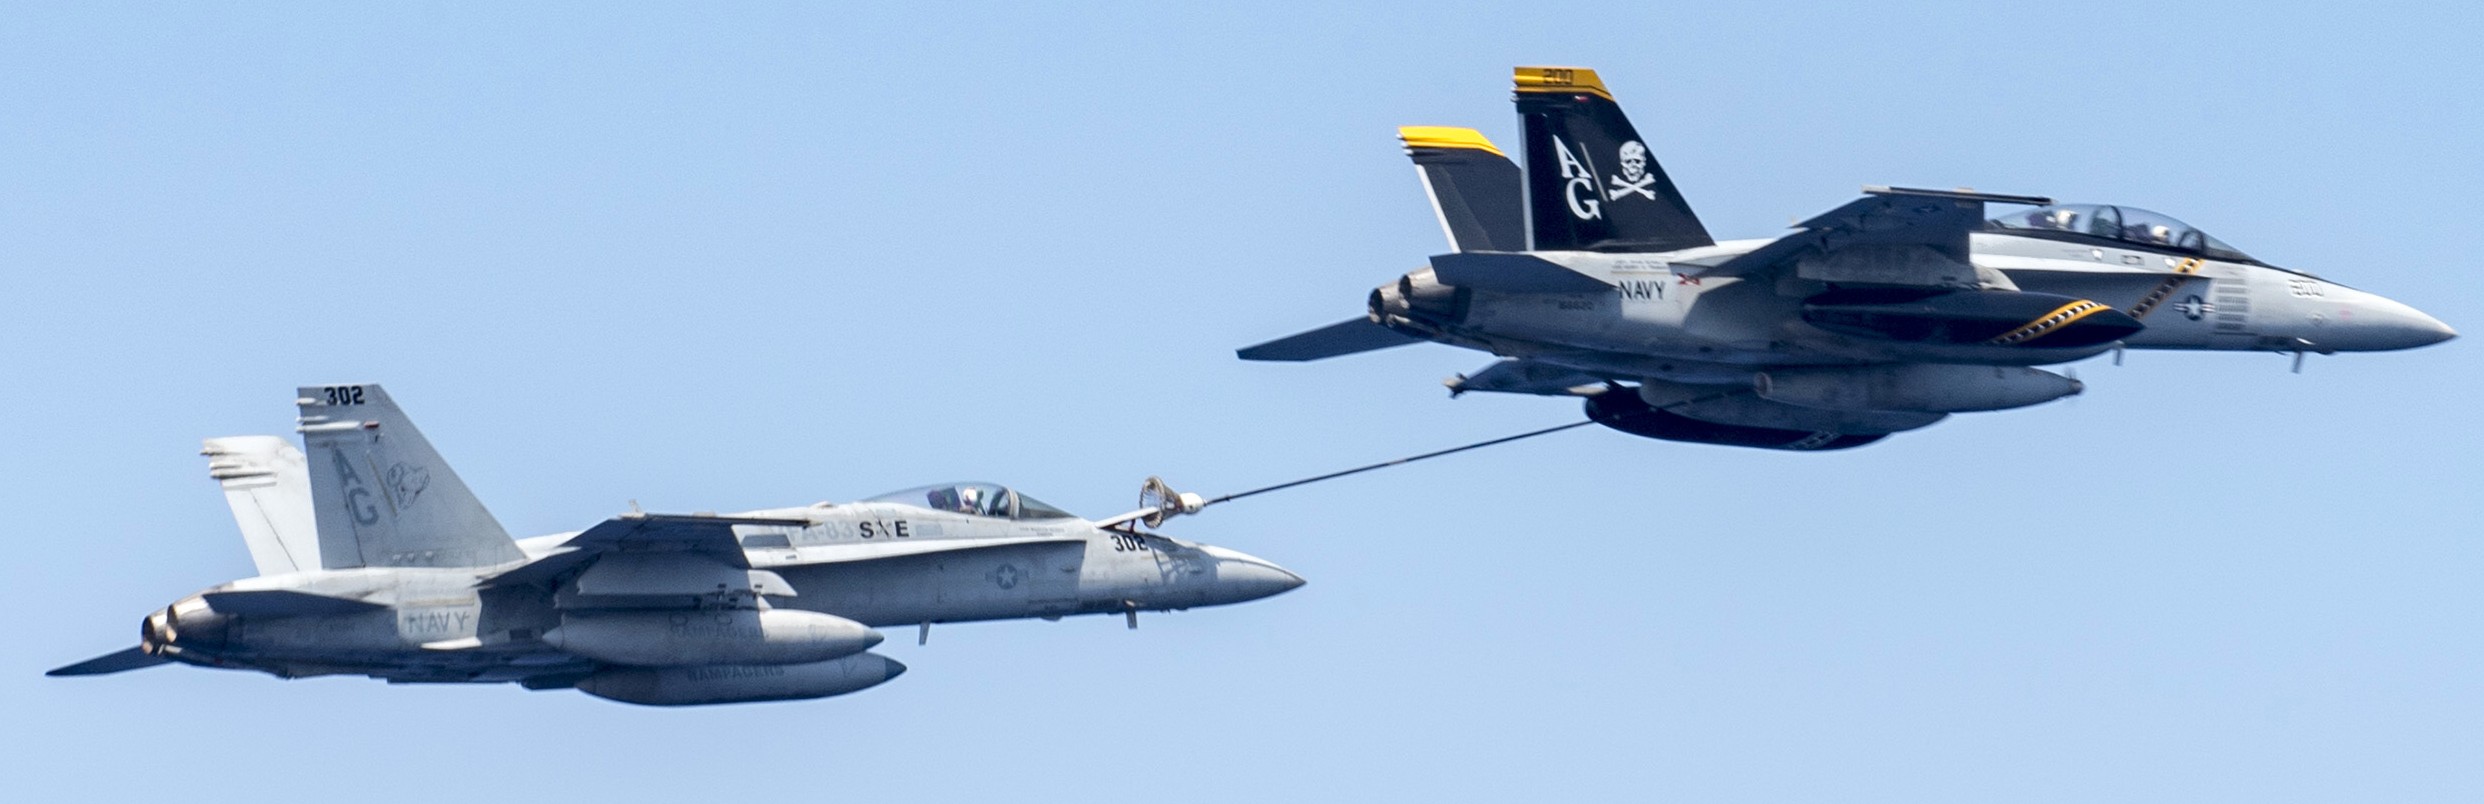 vfa-83 rampagers strike fighter squadron f/a-18c hornet cvw-7 uss harry s. truman cvn-75 41